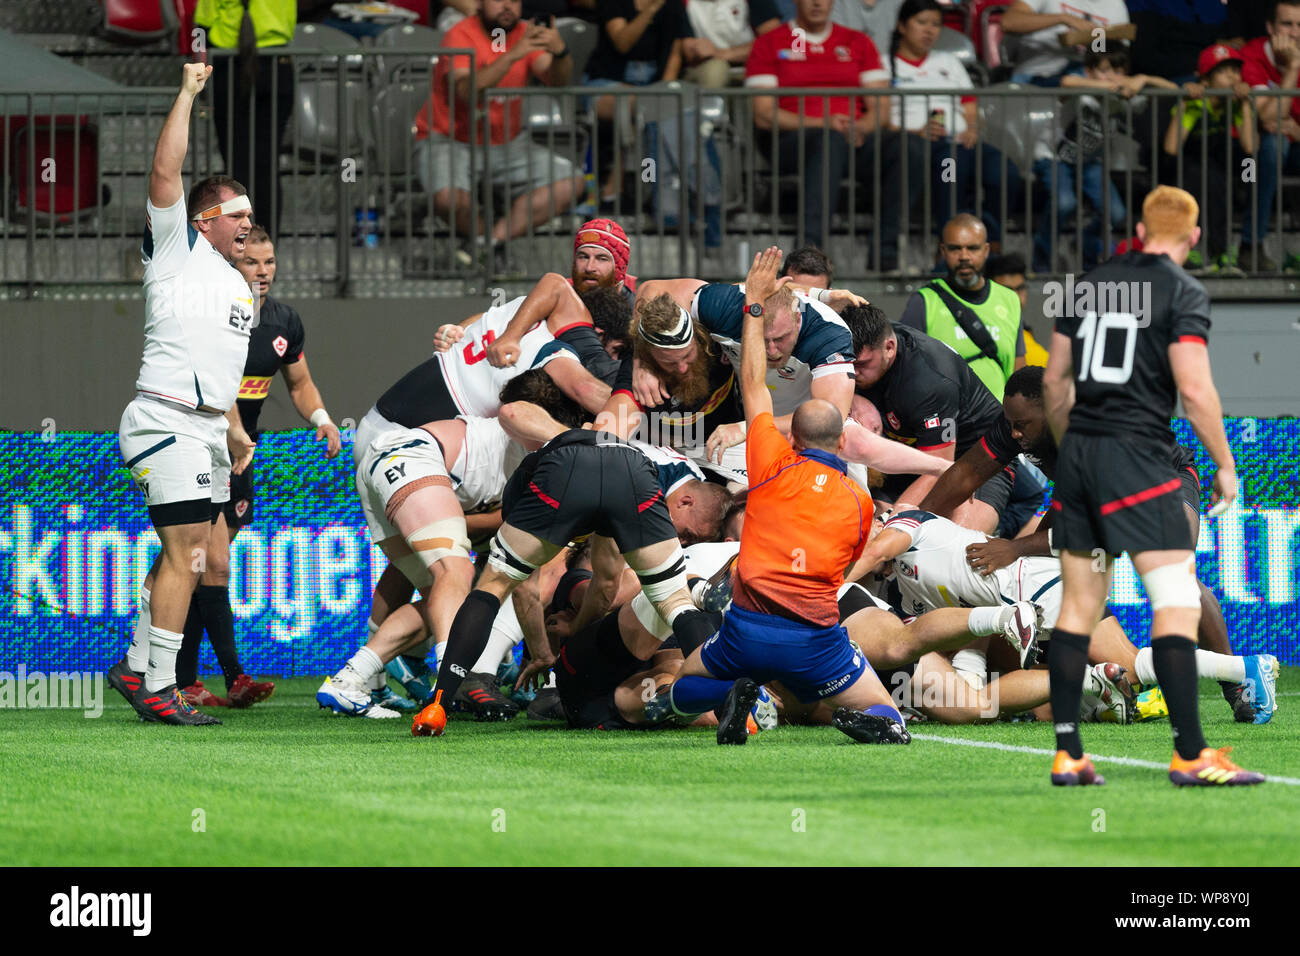 Vancouver, Canada. 7 September, 2019.  Refree signals try by U.S.A. Cam Dolan (8),  buried in a pile of players. USA wins 25-15. World Cup Rugby pre-game - Canada vs USA, at BC Place Stadium, Vancouver, Canada. Gerry Rousseau/Alamy Live News Stock Photo